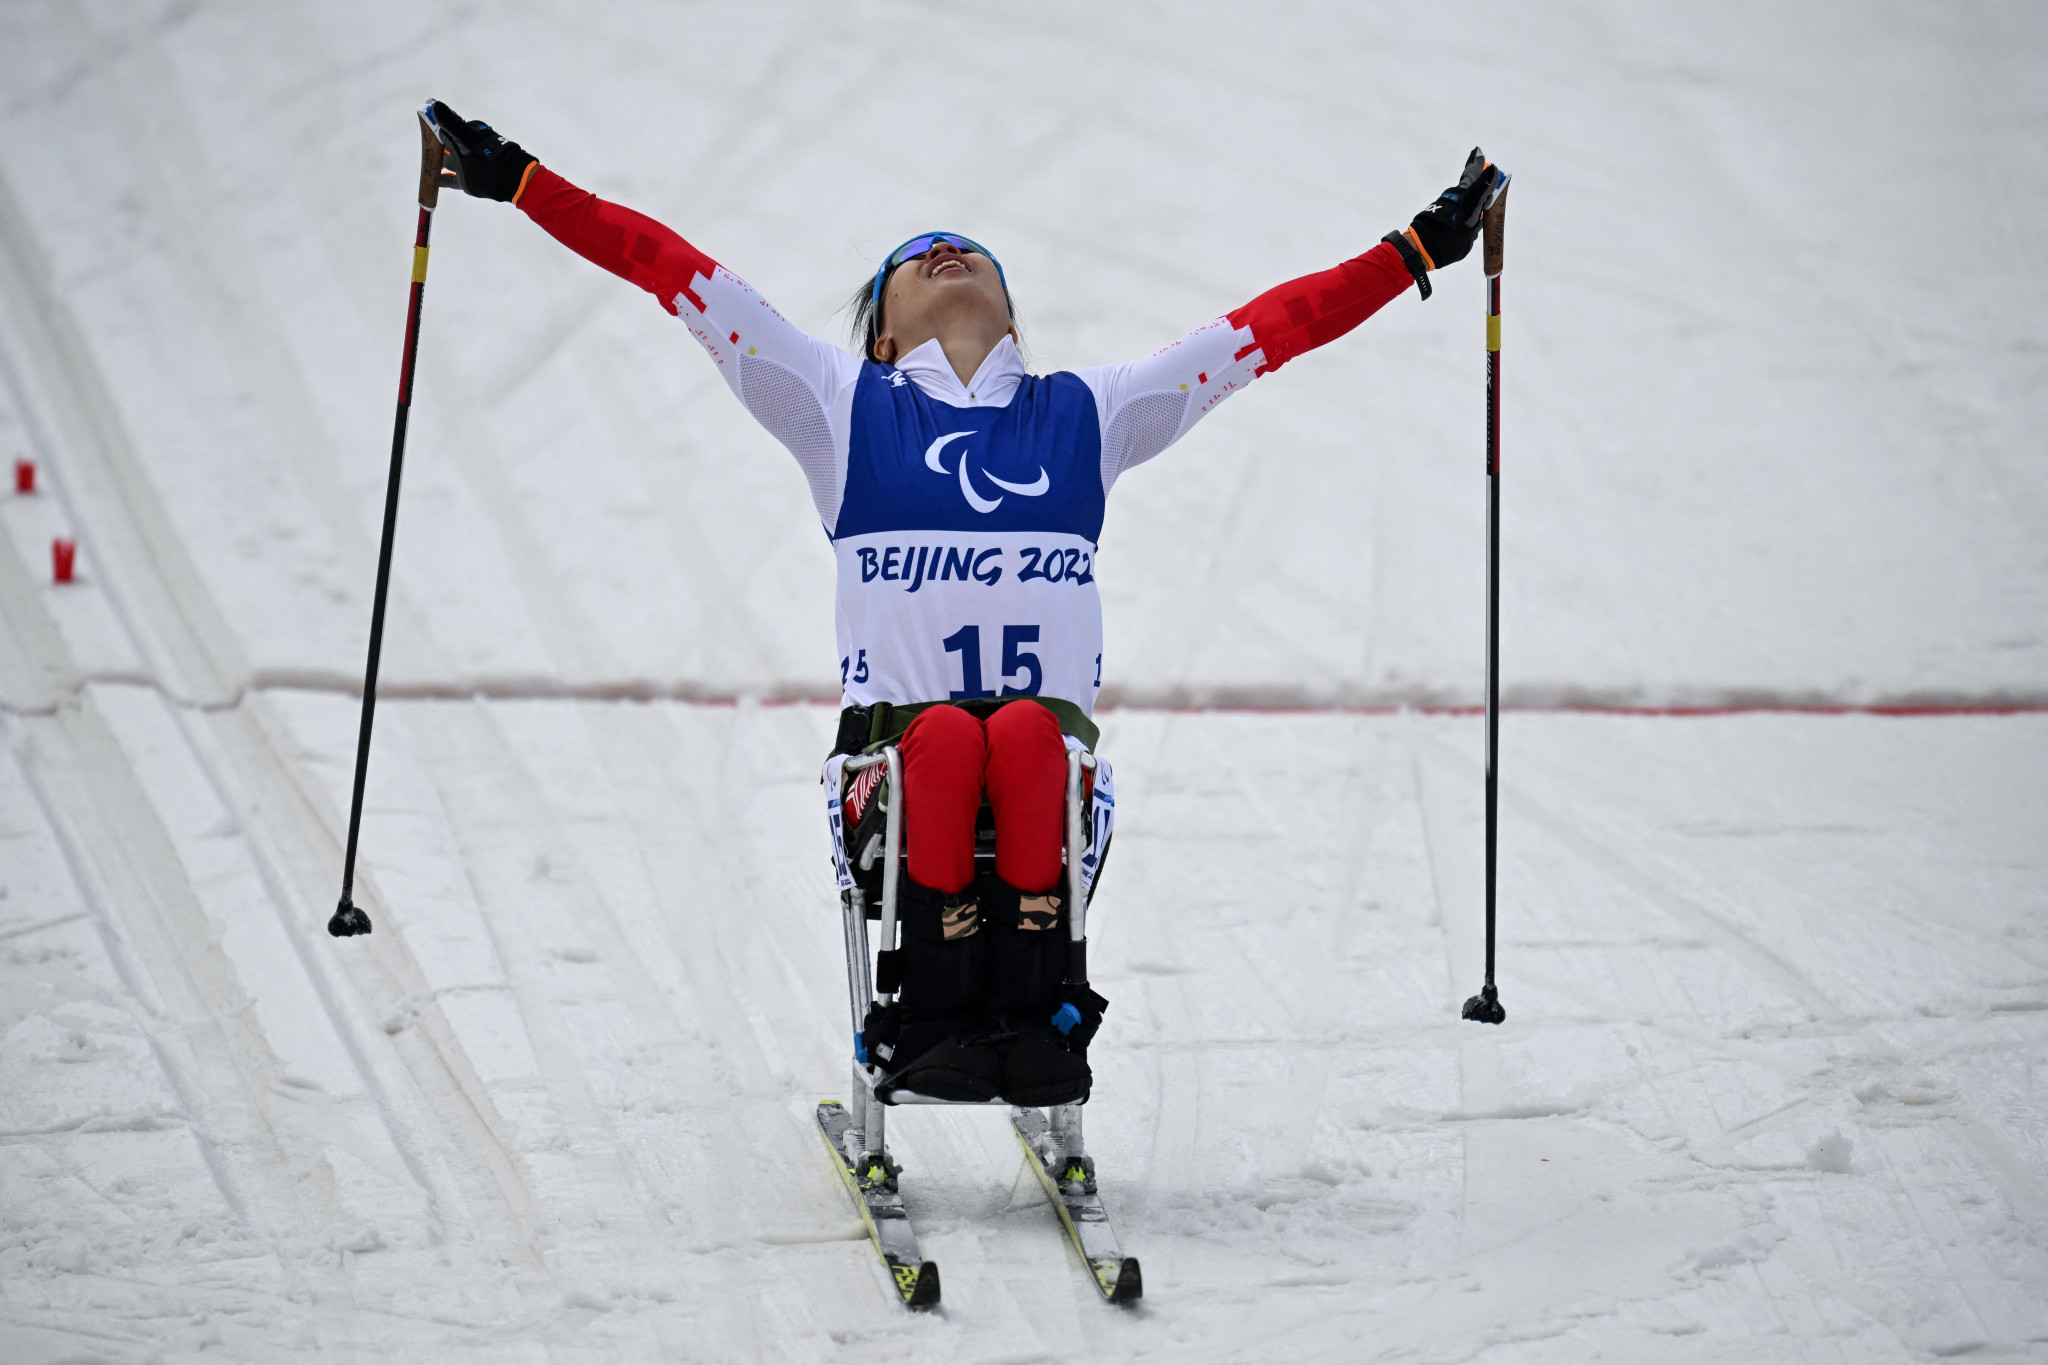 Andrew Parsons hopes that China's 10 gold medals so far, including two from Yang Hongqiong, will change Chinese attitudes towards people with disabilities ©Getty Images